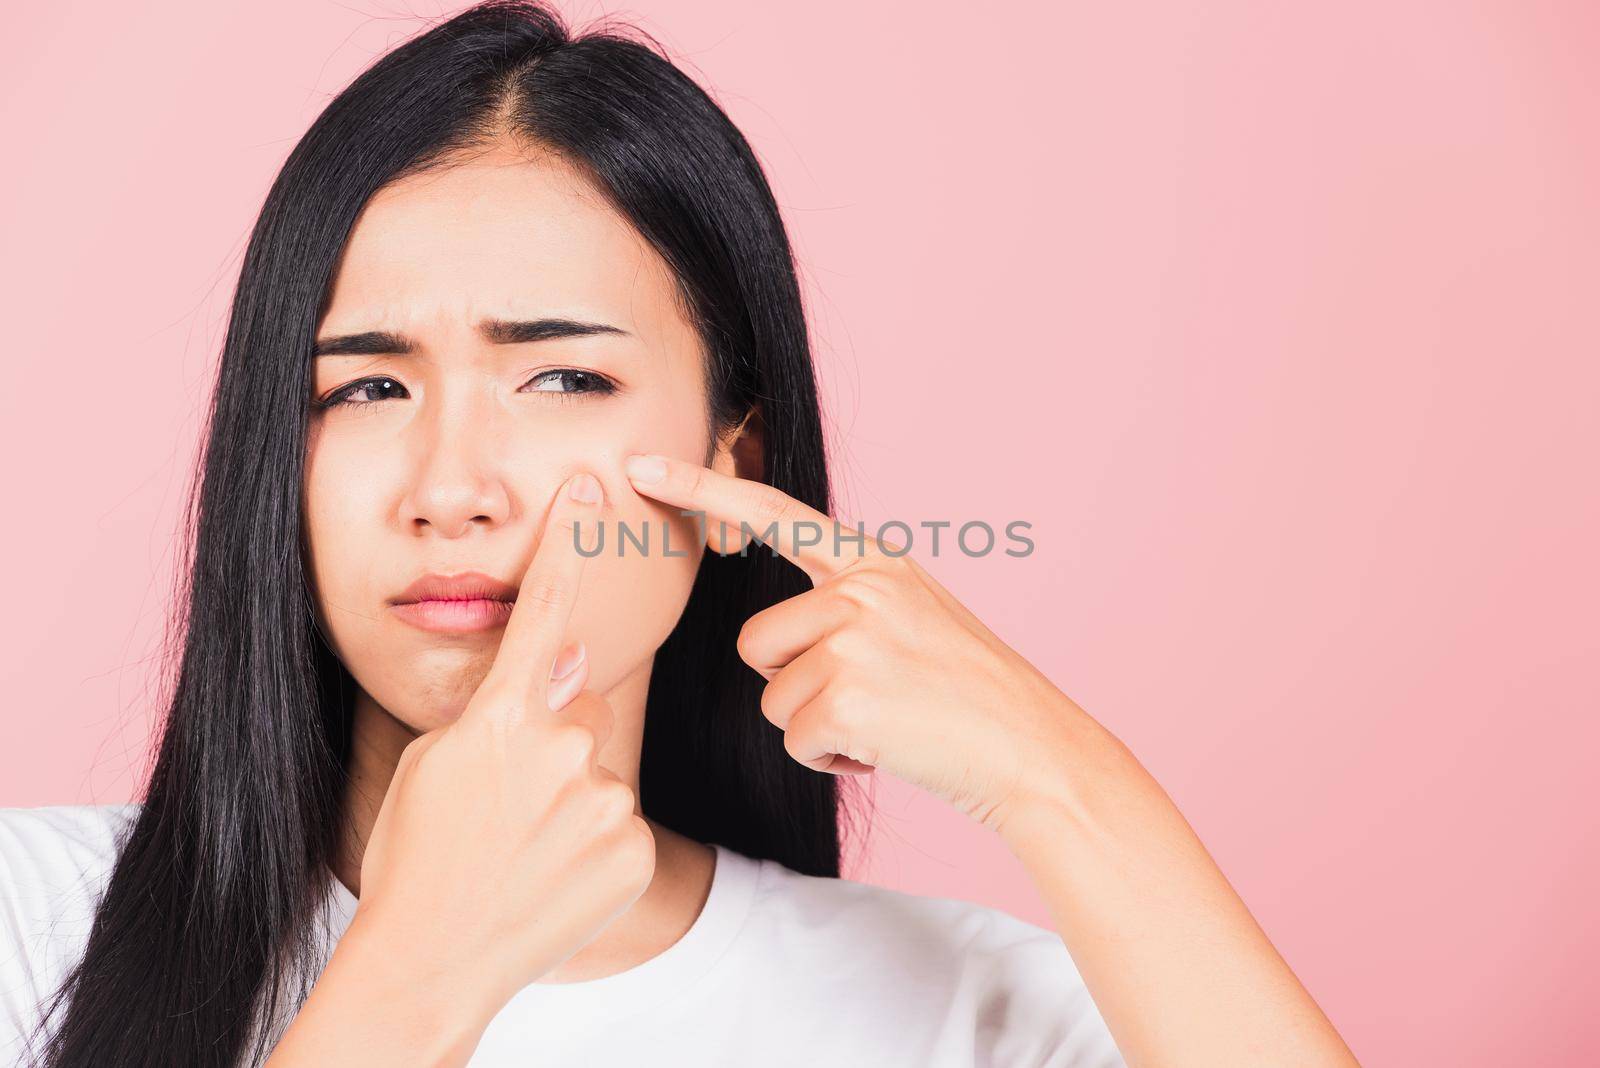 Portrait teenage Asian beautiful young woman having skin problems squeezing pimples on her face, studio shot on pink background, with copy space, Thai female acne, beauty care concept